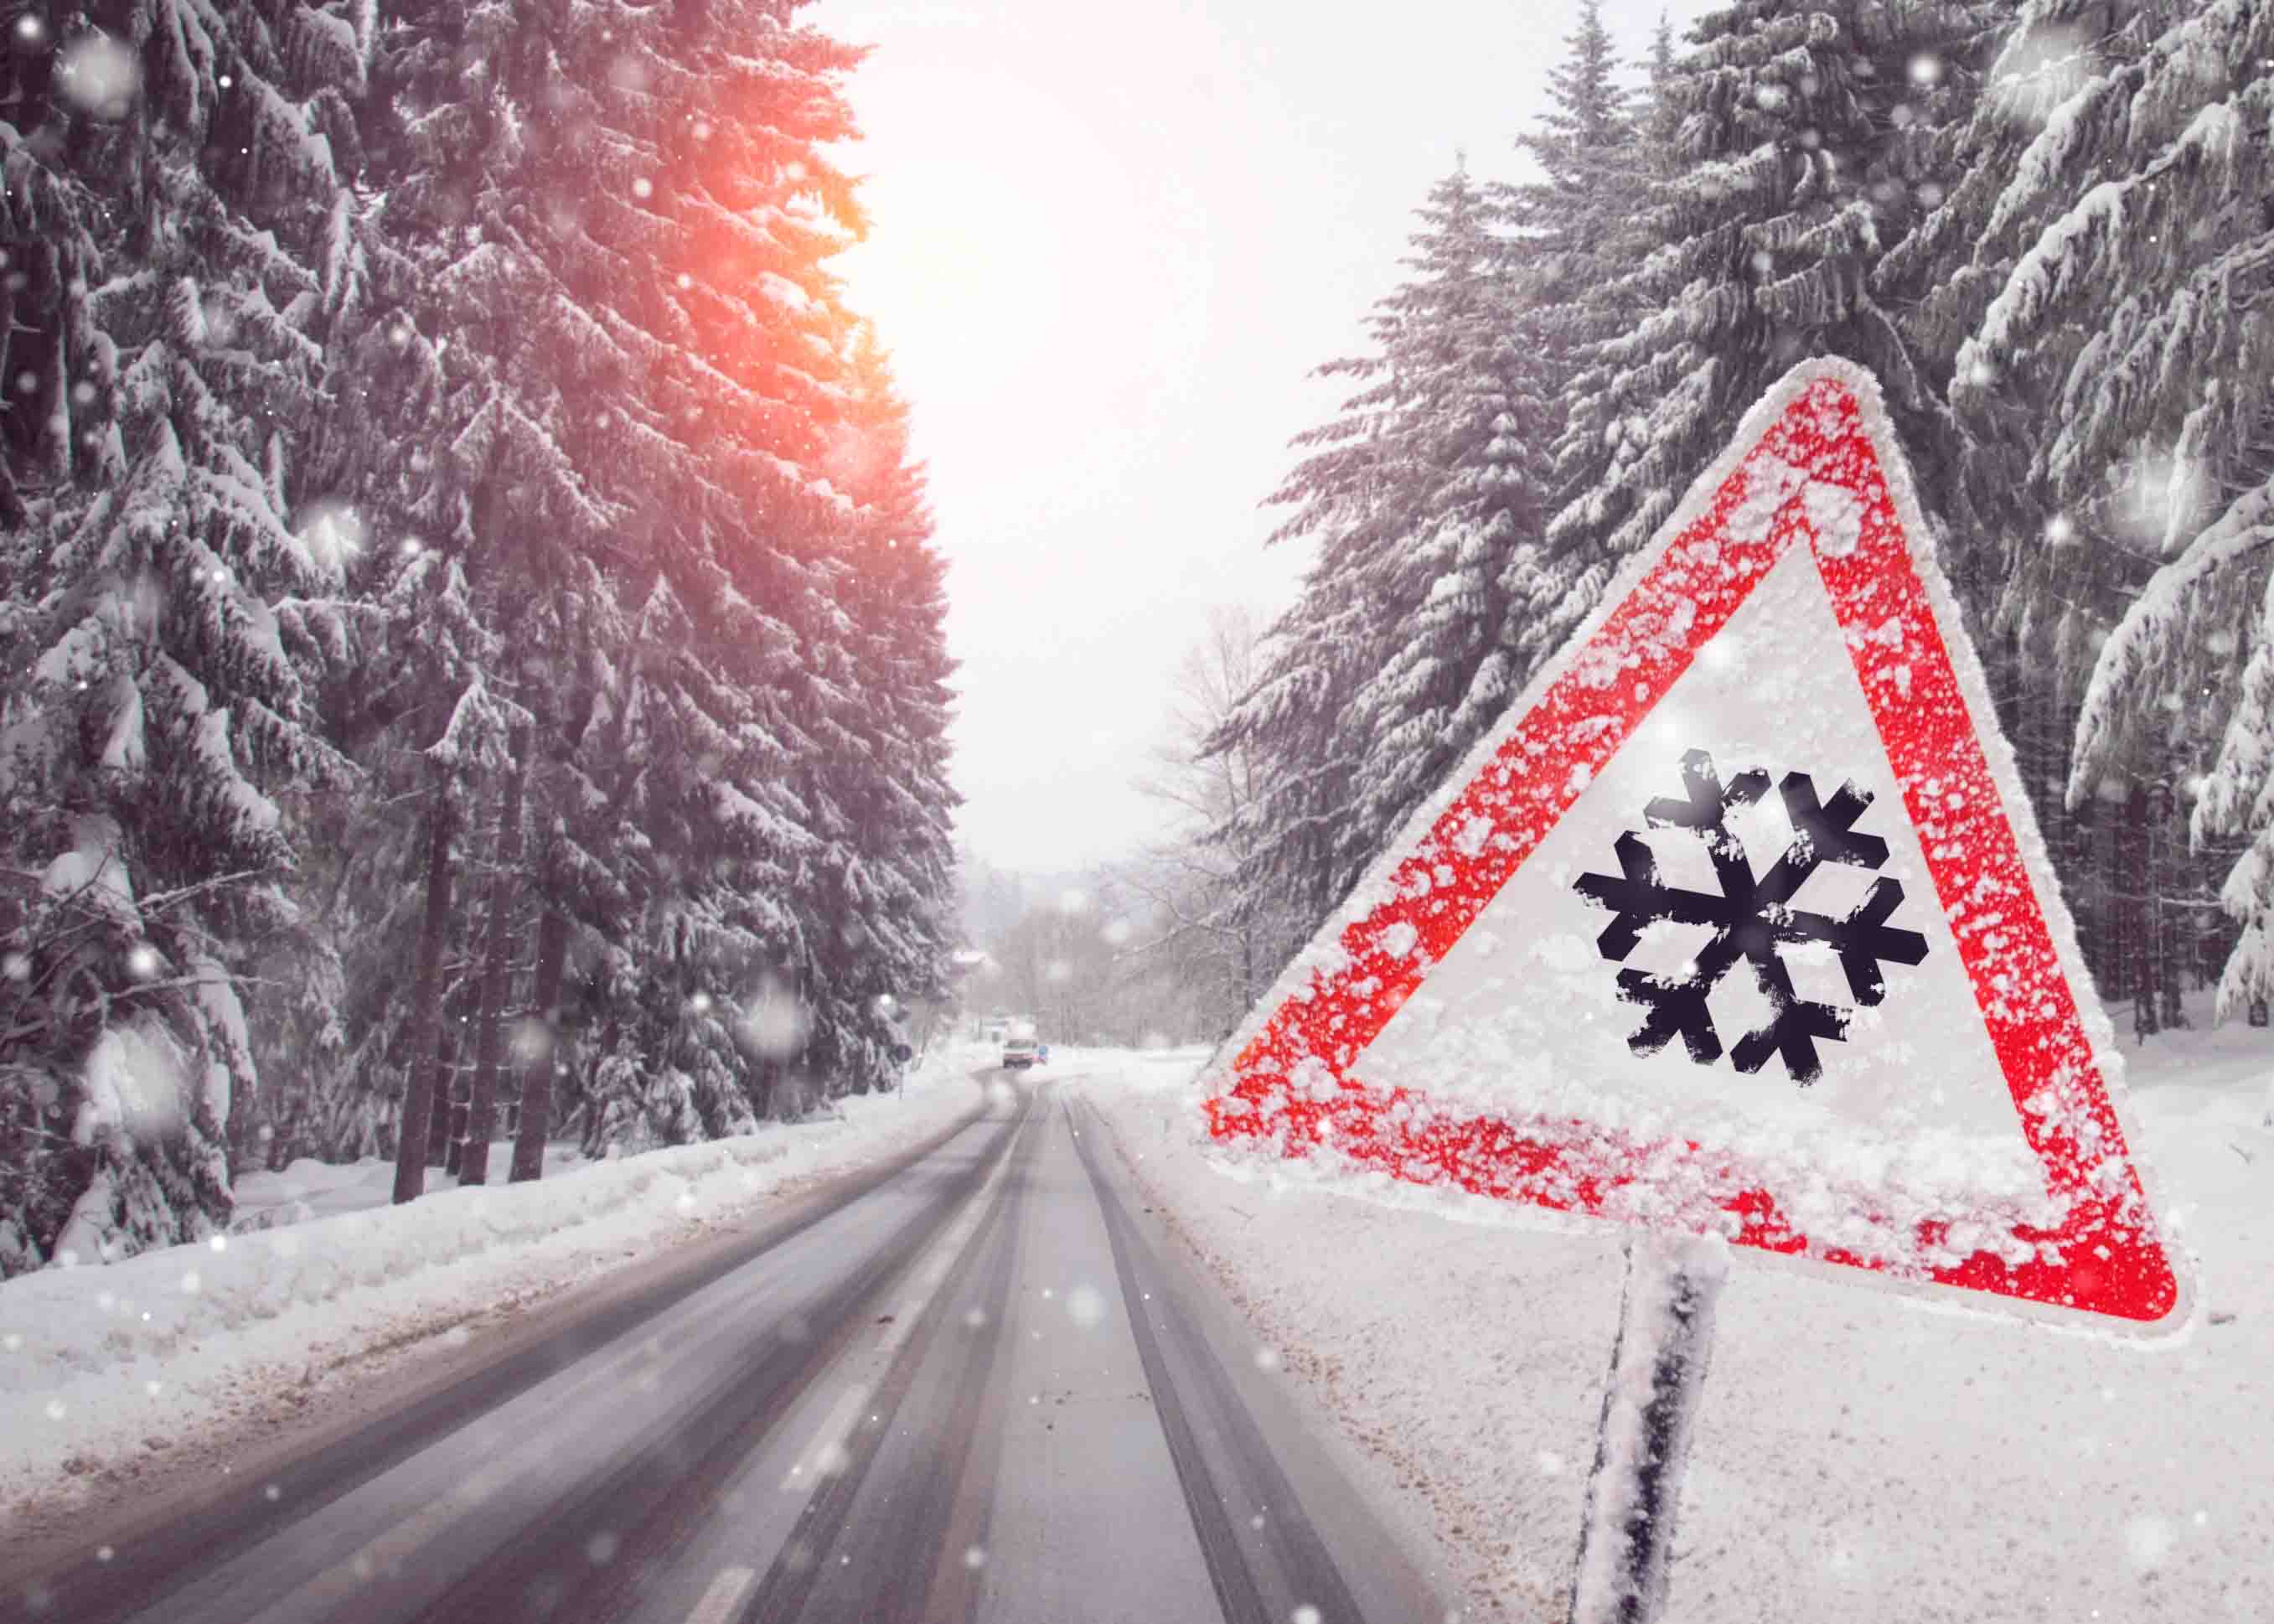 Image of snow warning sign on a snowy road.